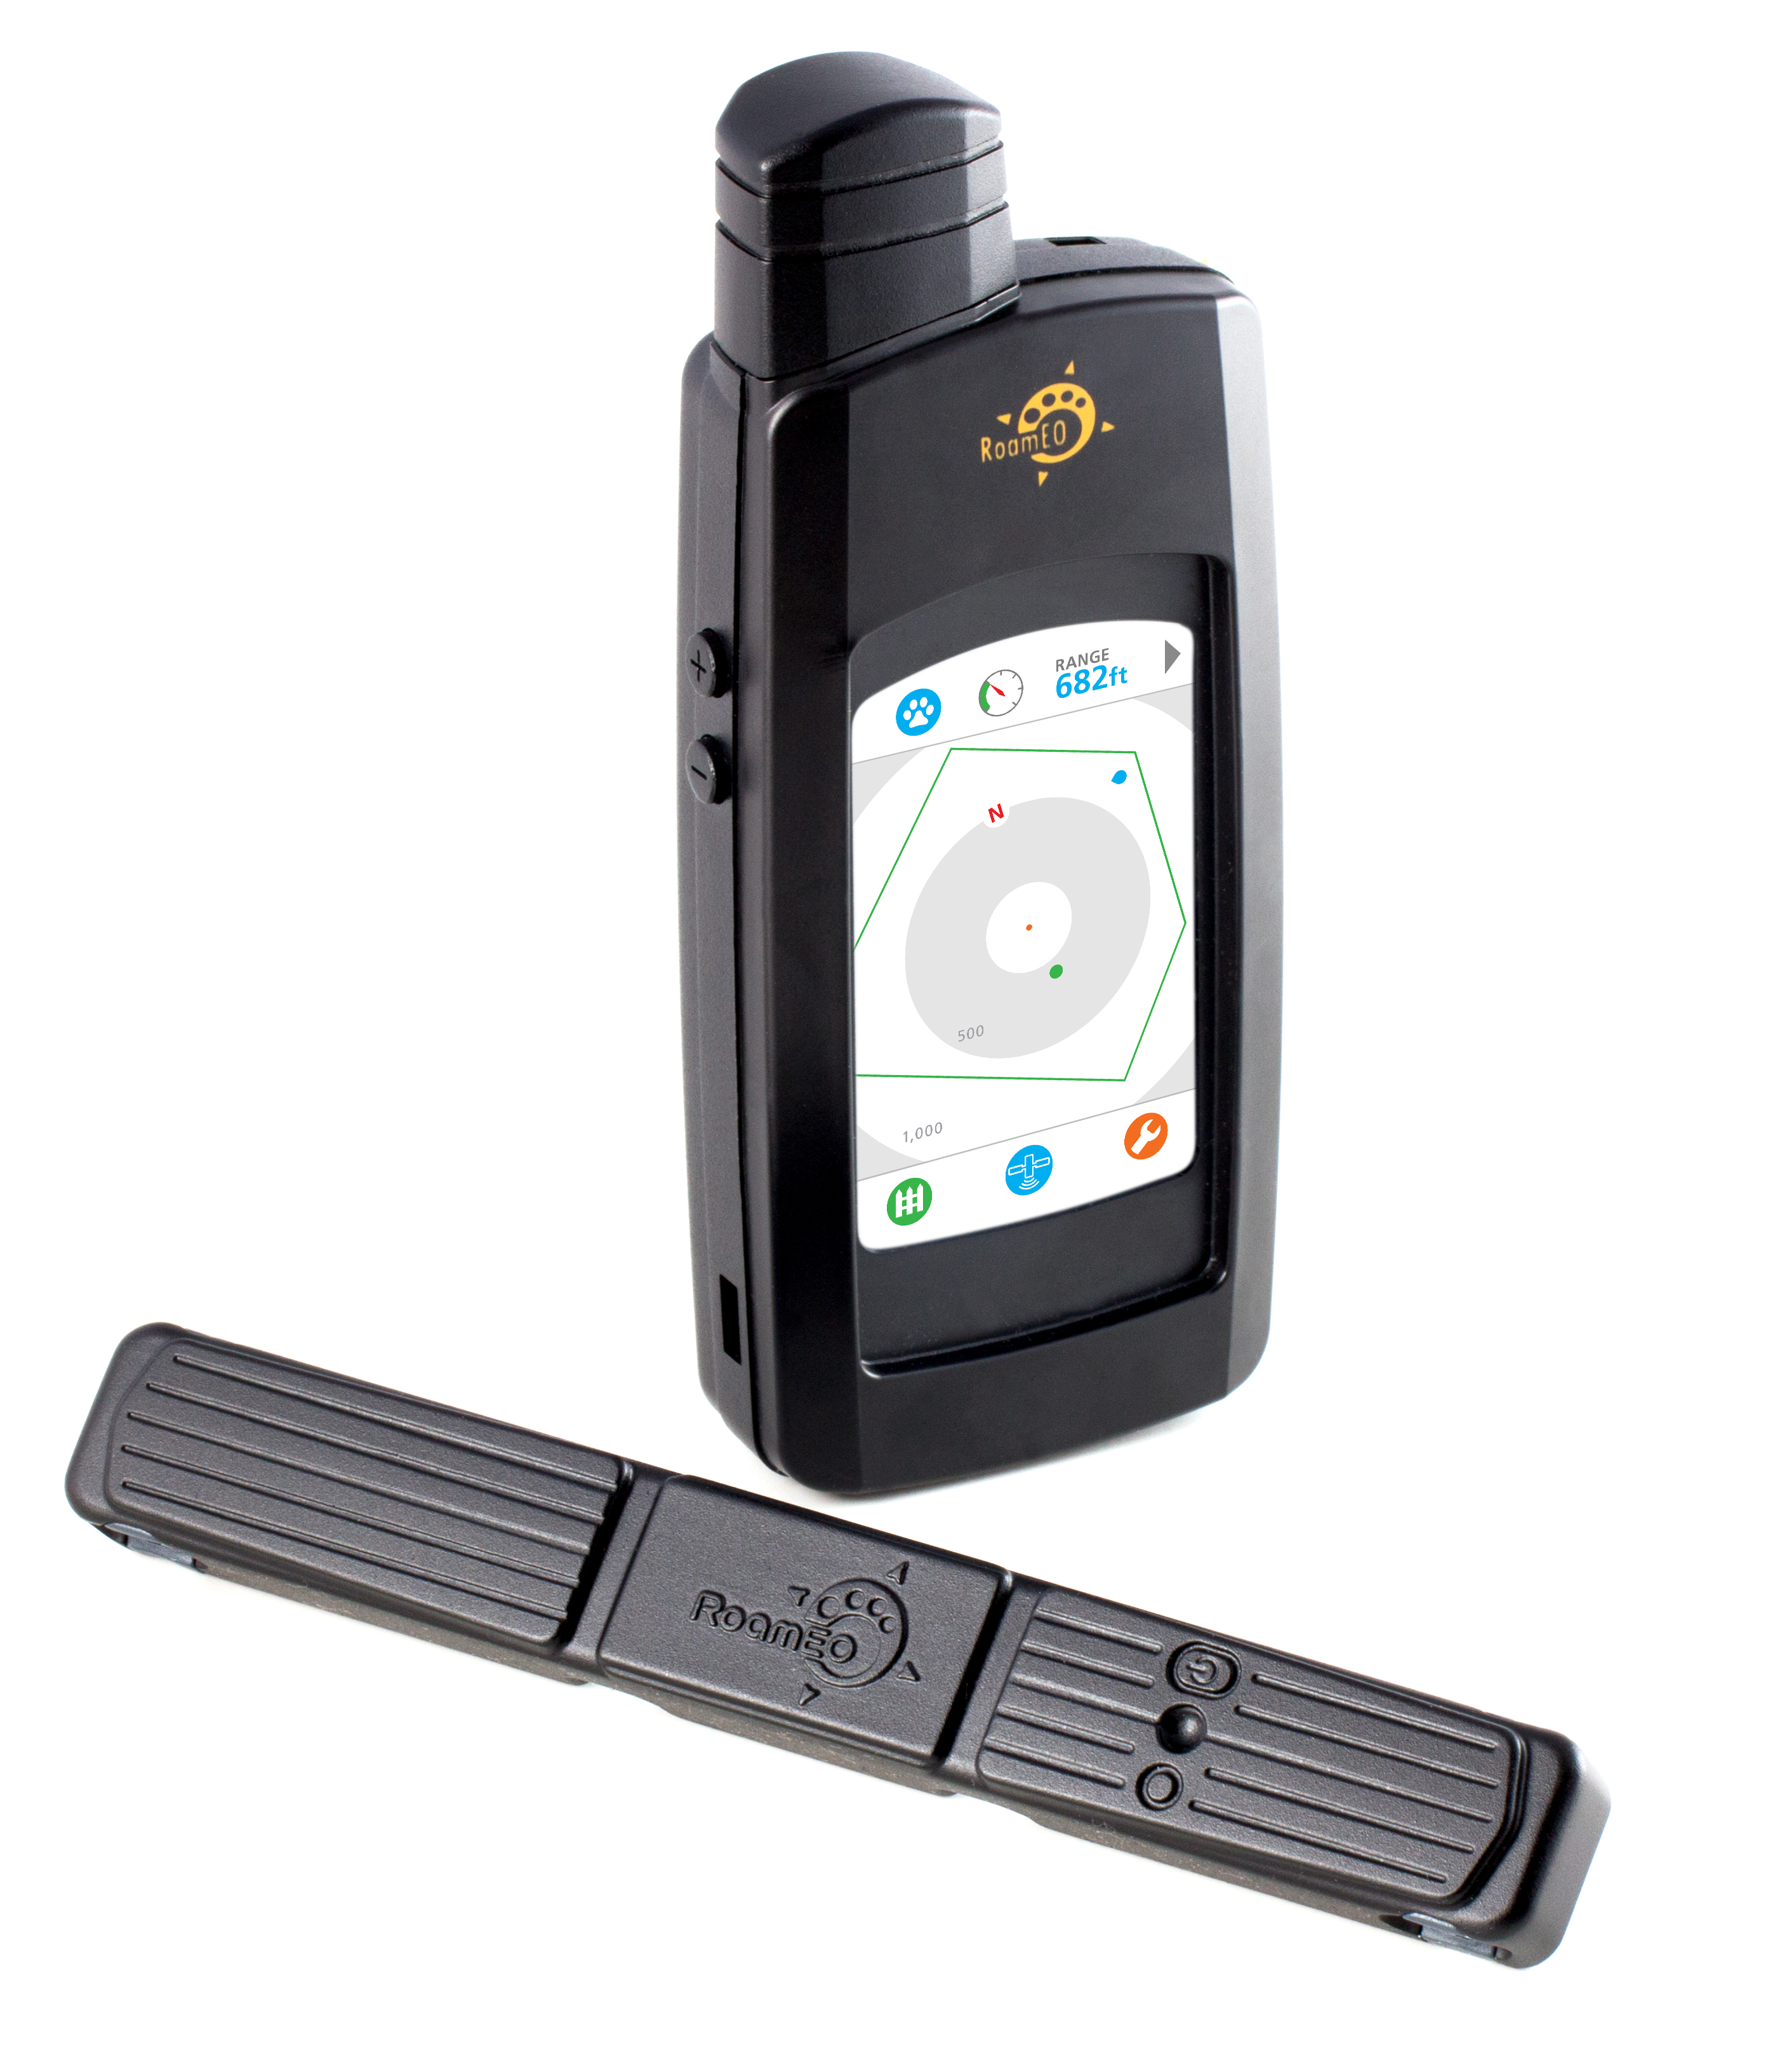 PetTronix Launches New GPS Pet Tracking System